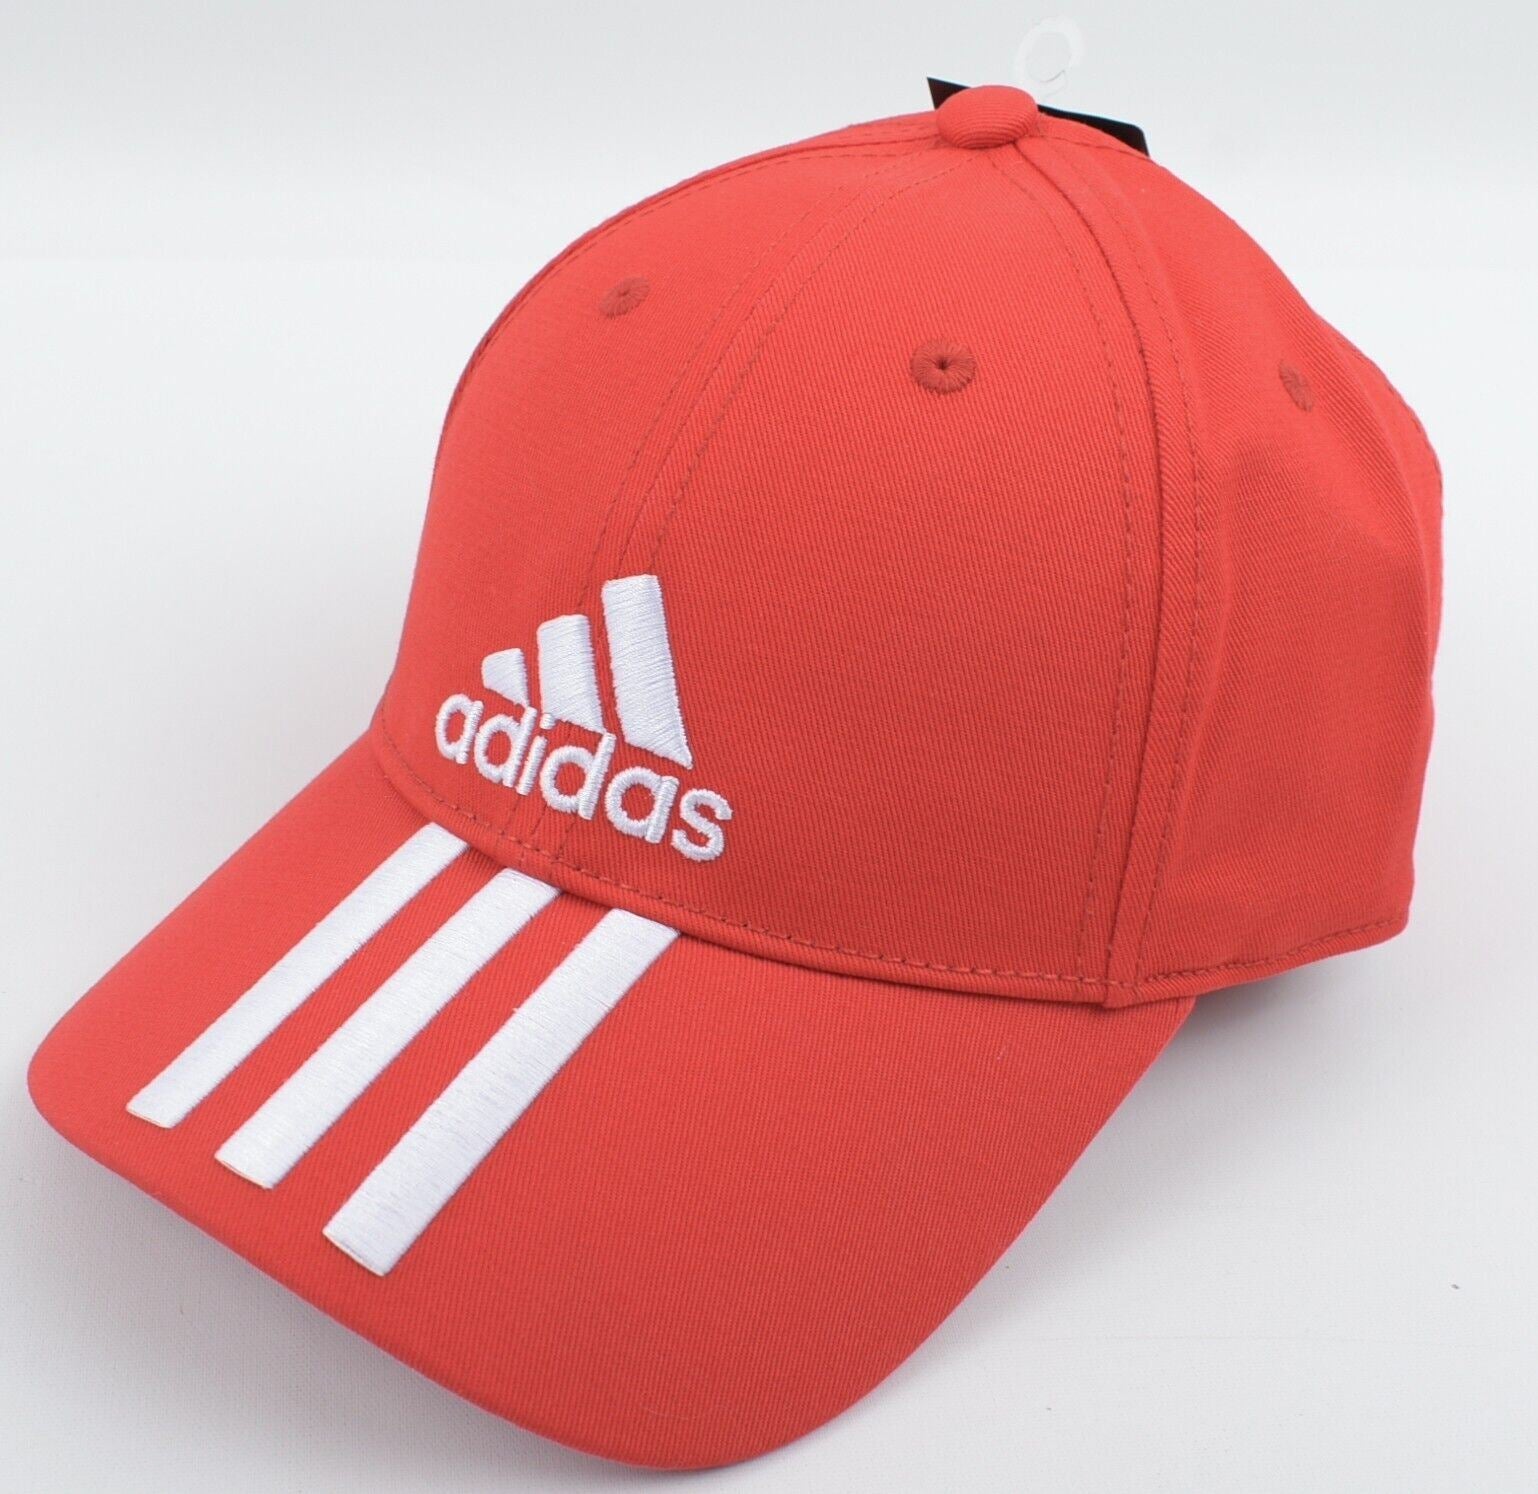 ADIDAS Mens Womens Logo Baseball Cap, Hat, Scarlet Red, One Size Adult